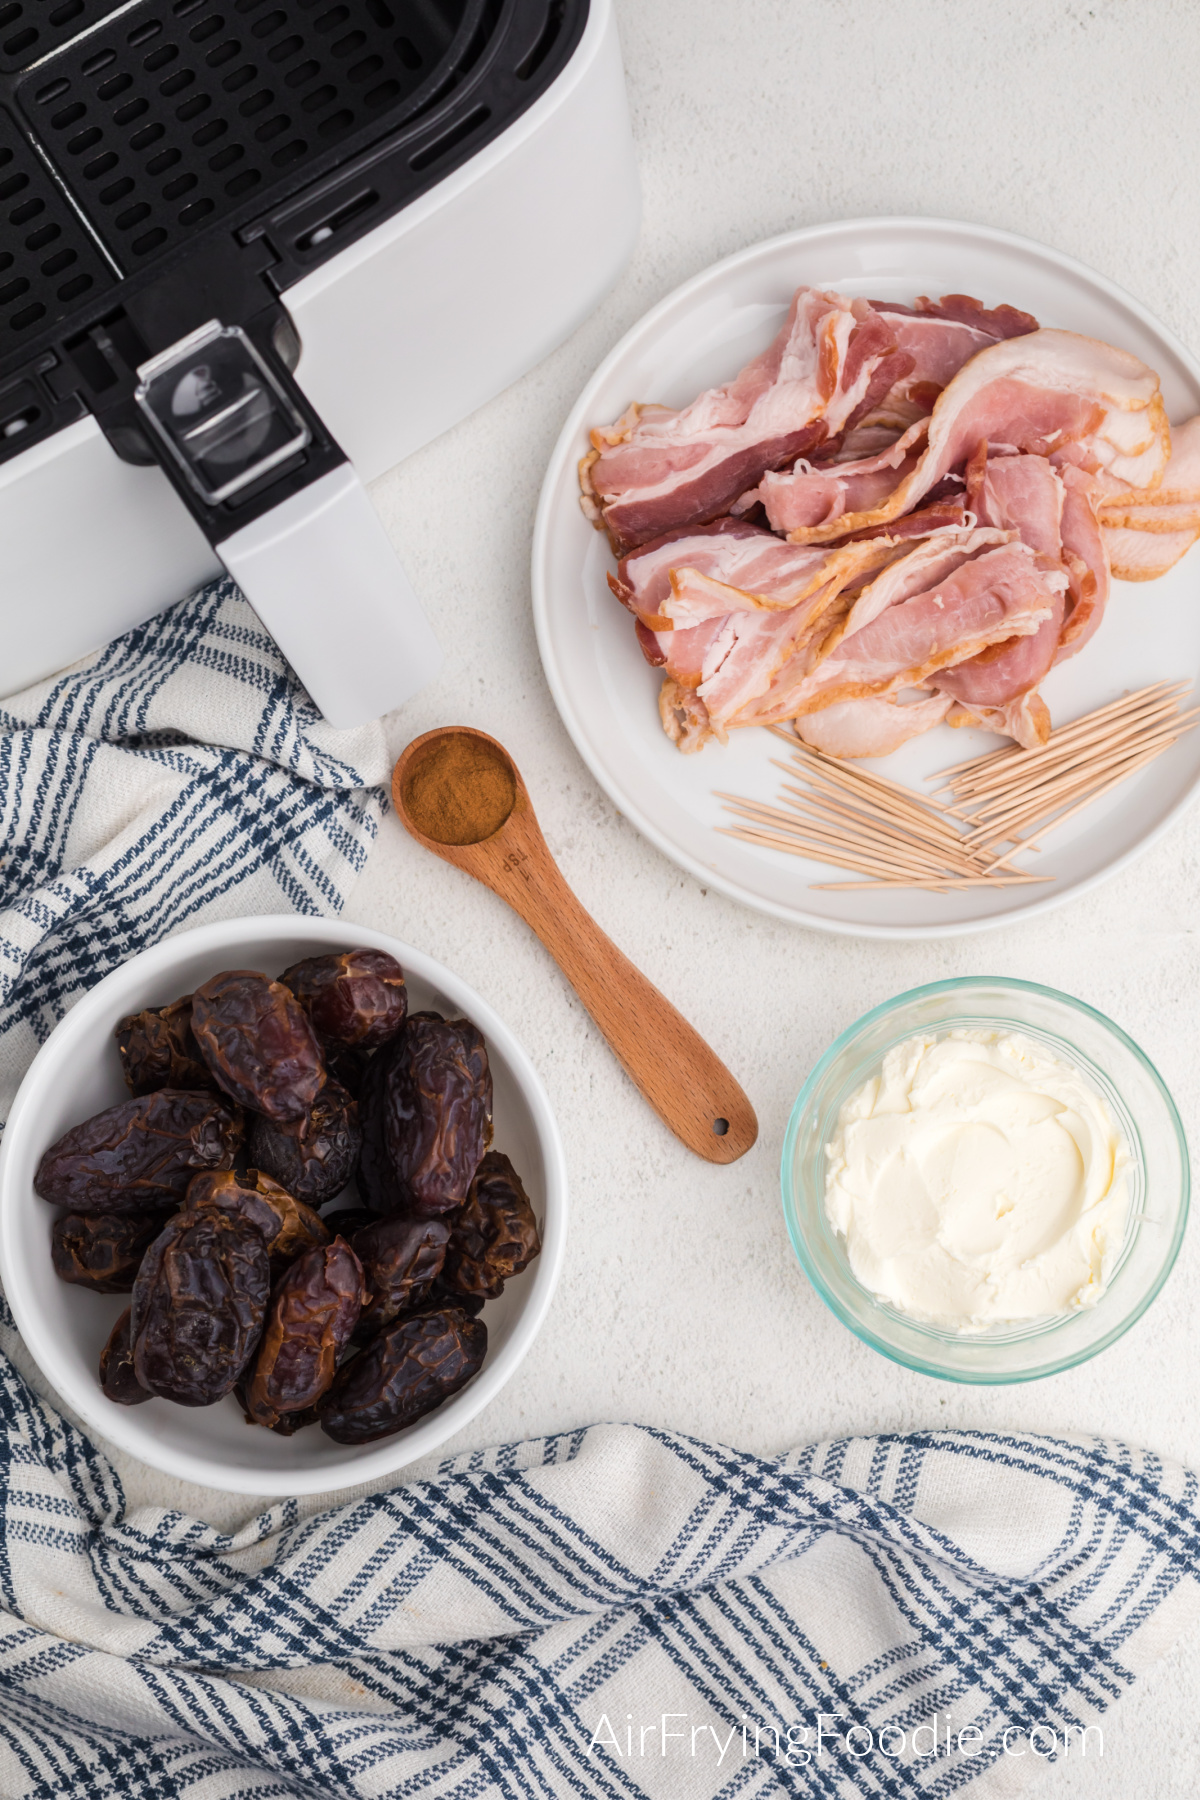 Table with air fryer basket, bowl of dates, cream cheese, plate with bacon and toothpicks, and a teaspoon of cinnamon.